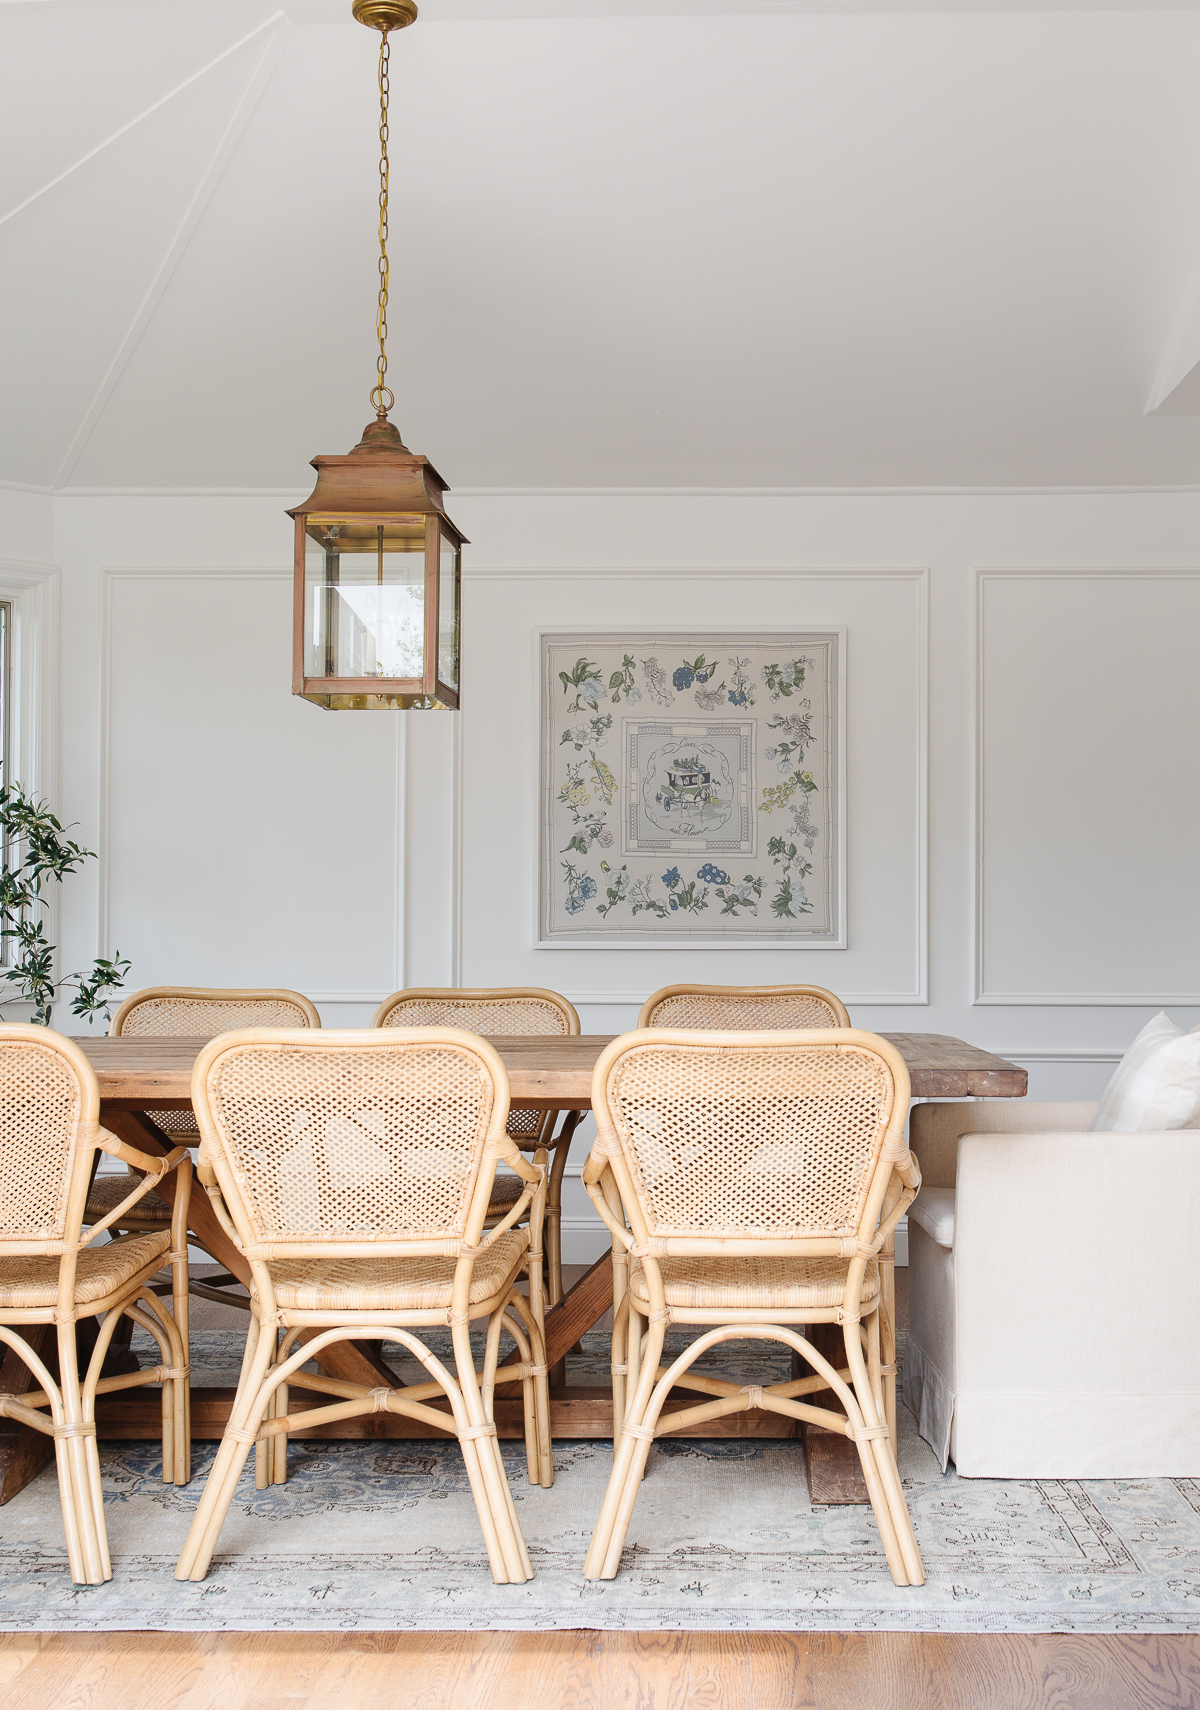 A white dining room with a wood table, rattan chairs and picture frame moulding on the walls.